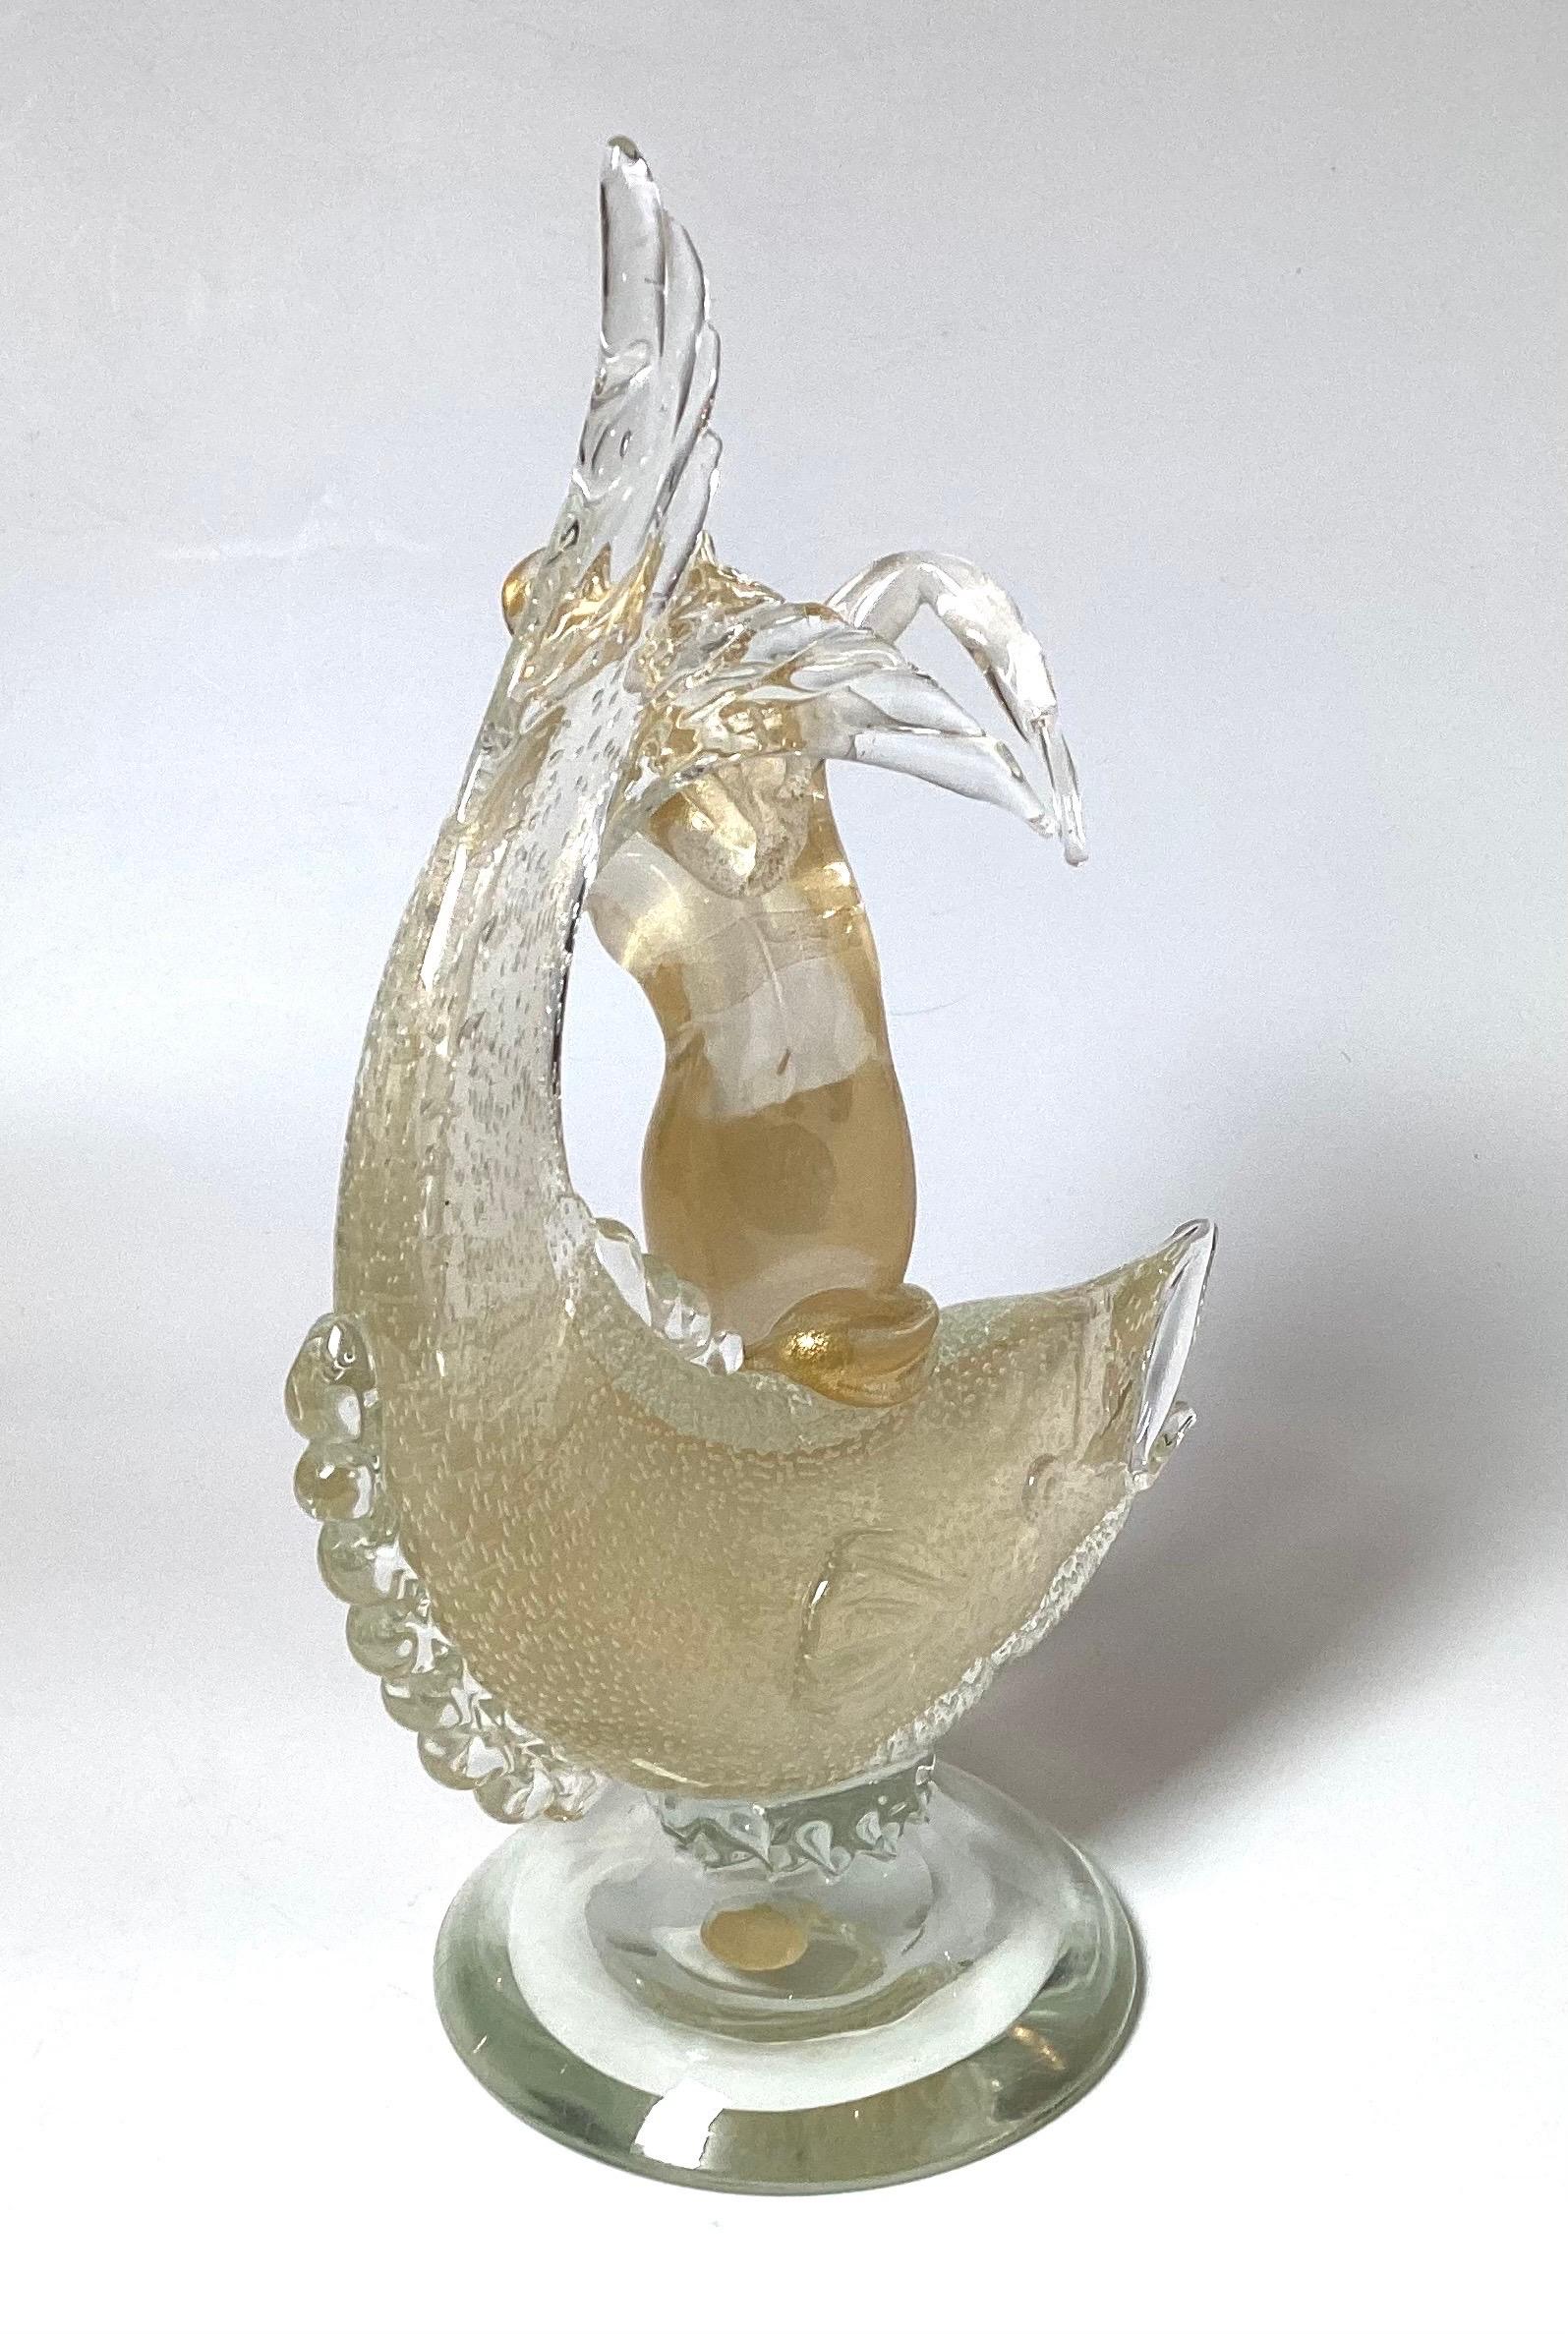 A rare Salviati Murano had blown fish and mermaid sculpture with internal gold fleck and bullicante design.  
Since 1859, Salviati has been researching new vernaculars languages of Murano glass interpreting and modernizing its inexhaustible magic,